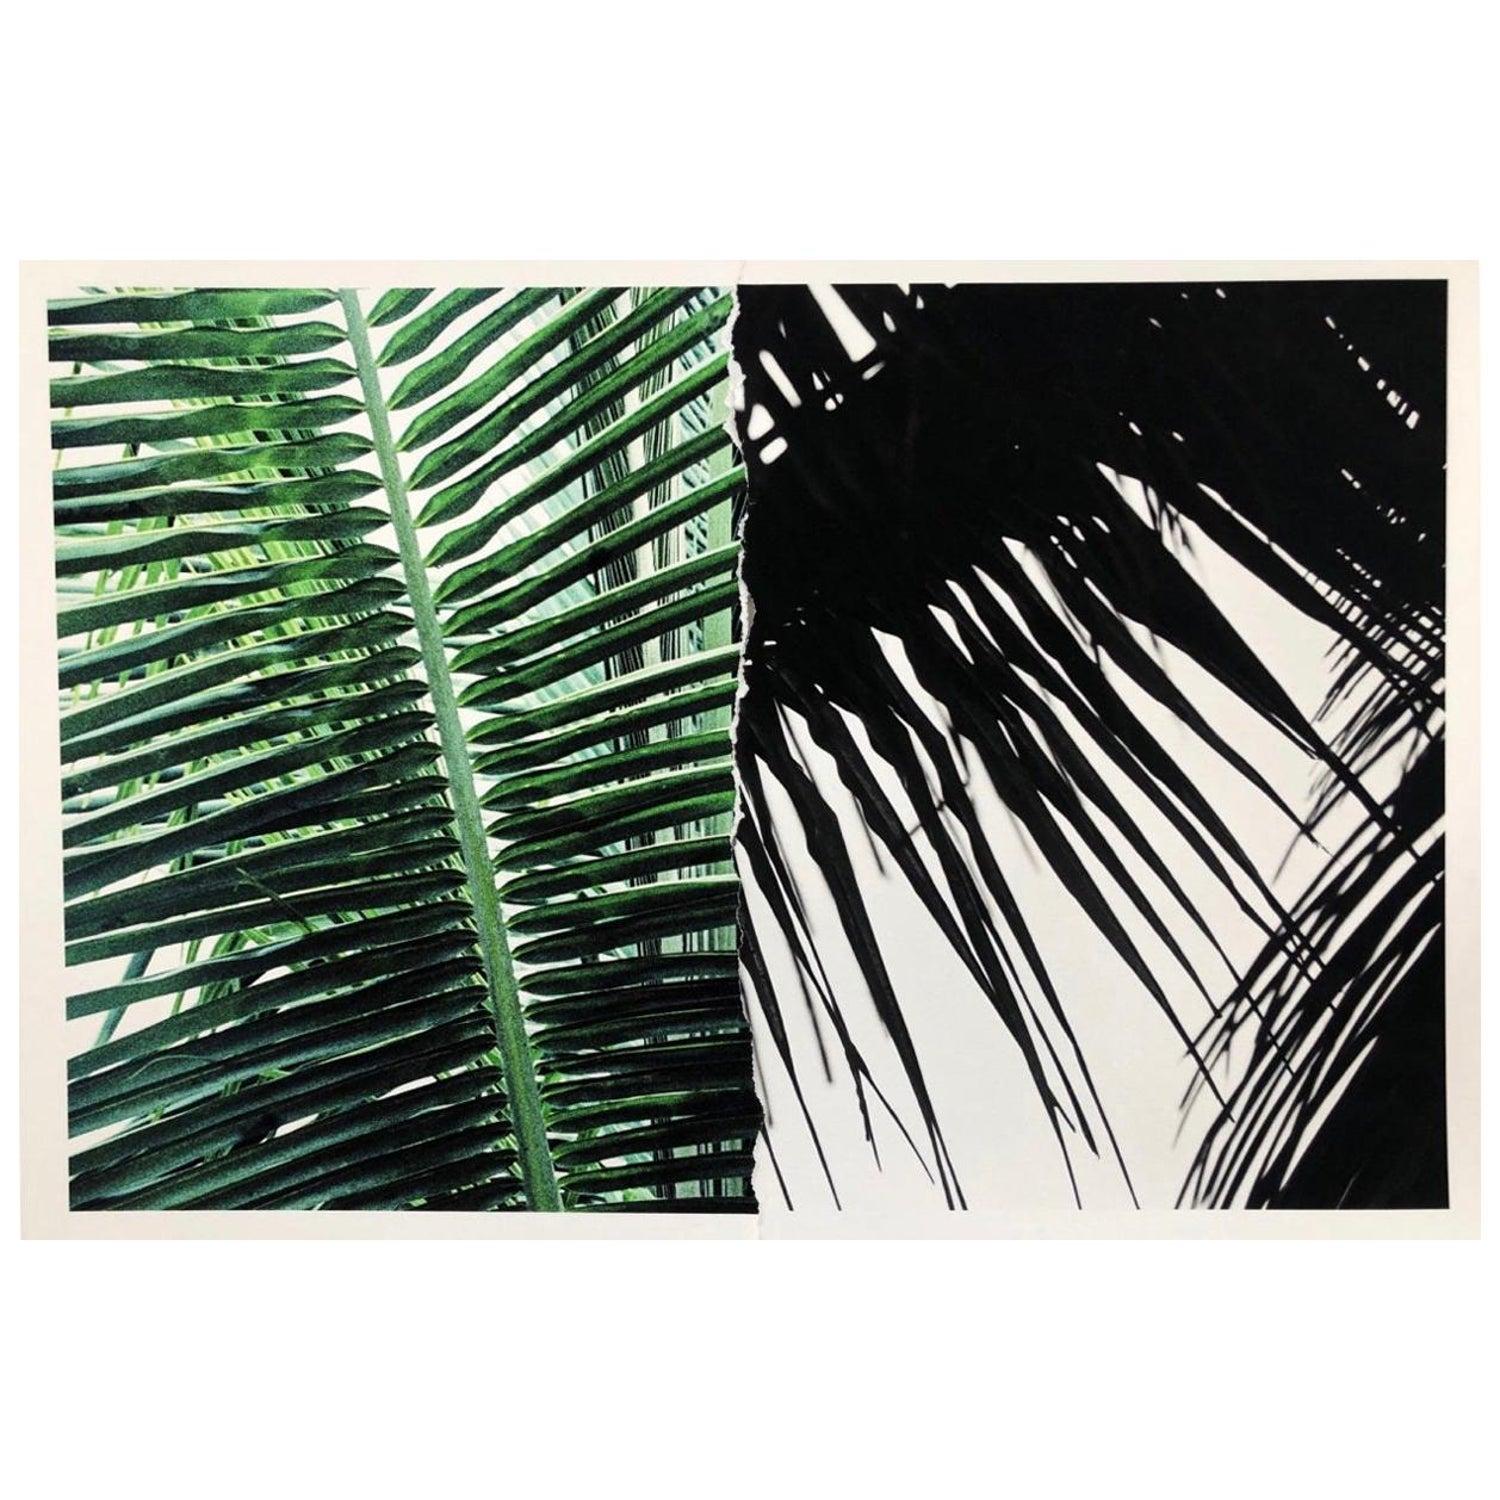 Photography is unframed.

Printed on archival photo-rag paper 

Photographed by Ruvan Winesooriya in his Yucatán series. This collage brings an organic visual effect with the harmonic illustration of nature and palm leaves.

